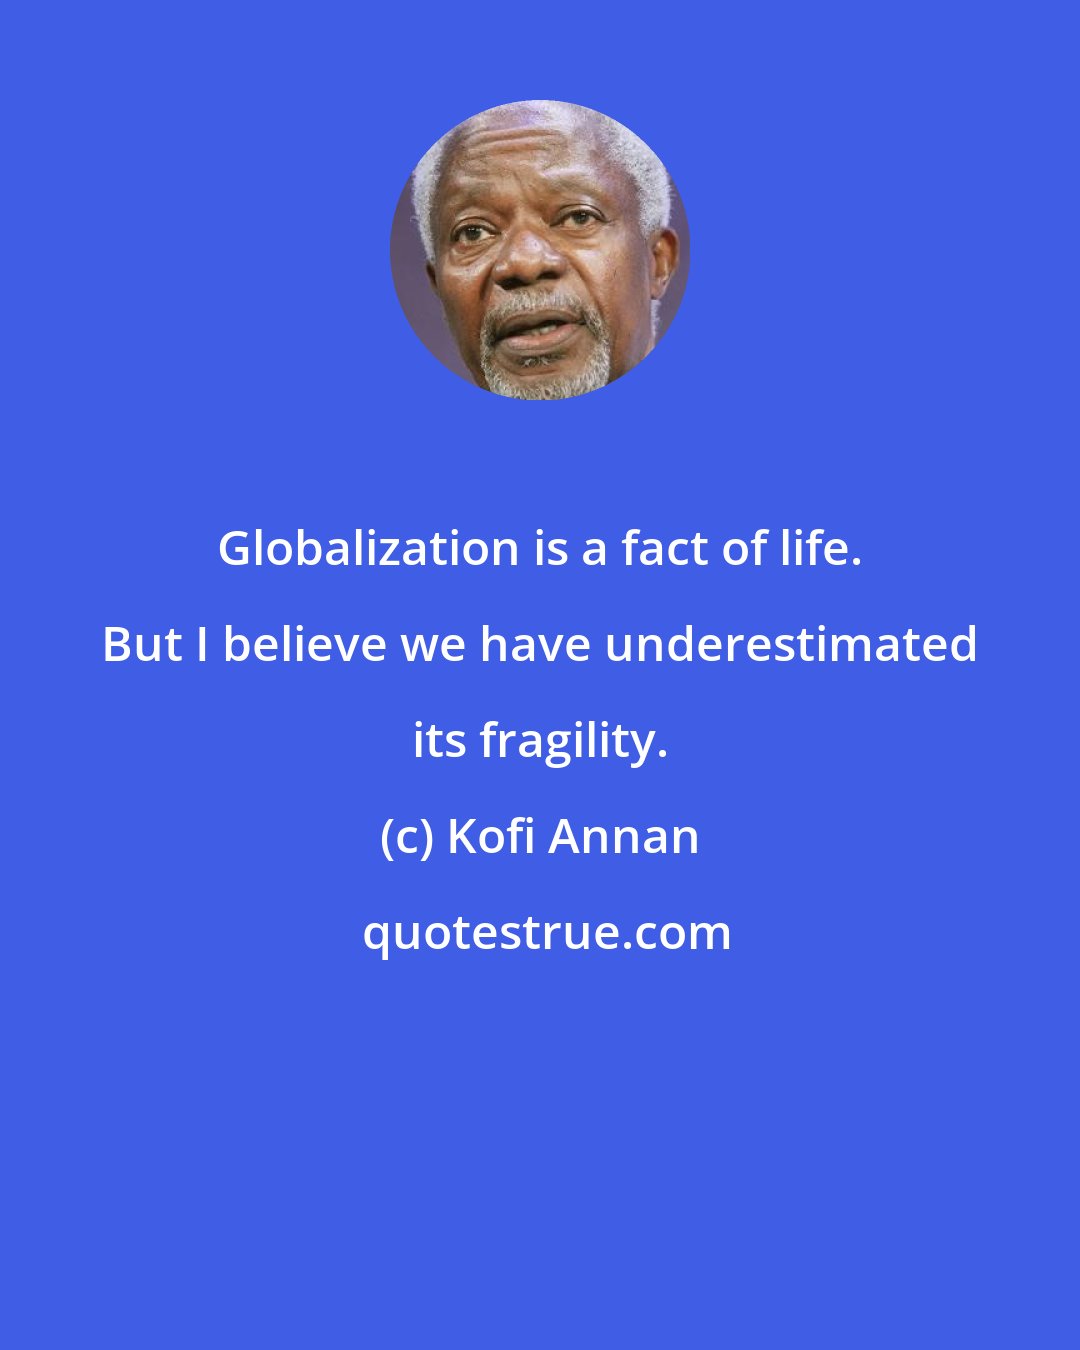 Kofi Annan: Globalization is a fact of life. But I believe we have underestimated its fragility.